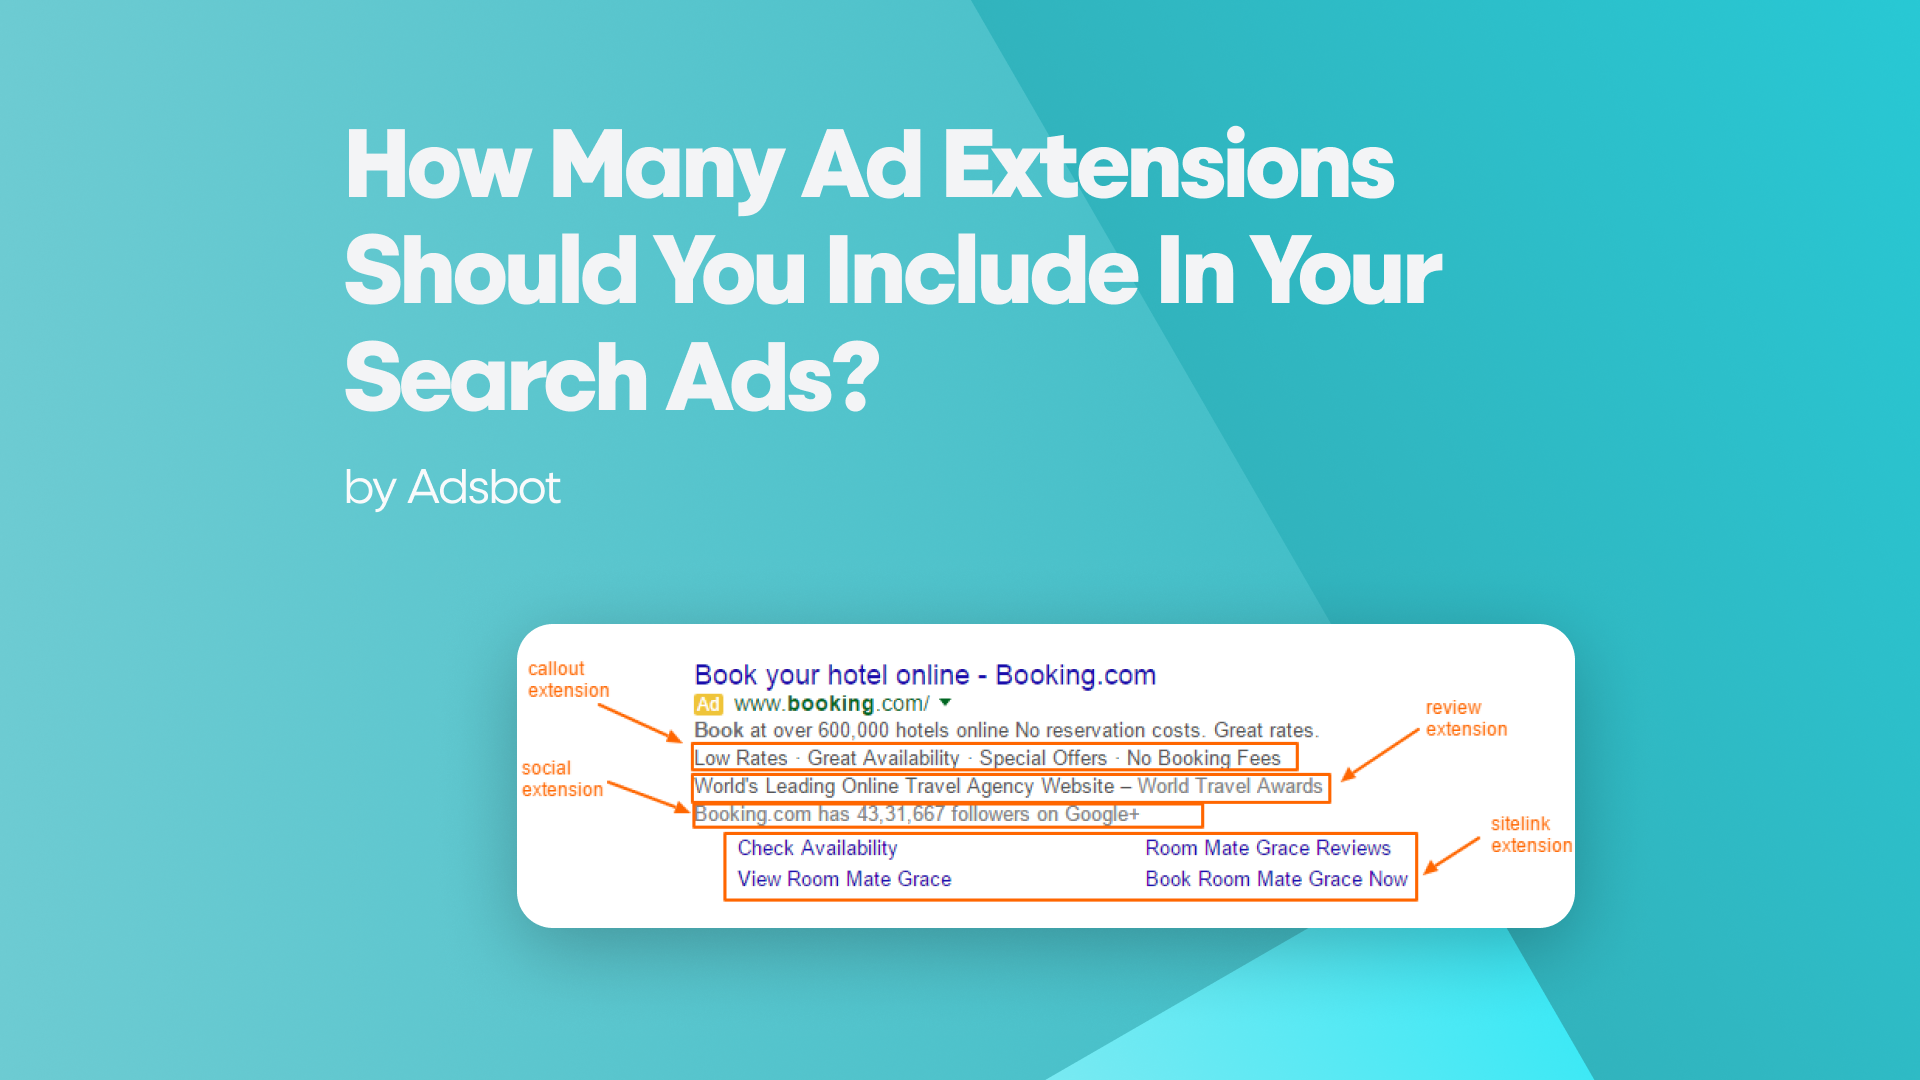 How Many Ad Extensions Should You Include In Your Search Ads?